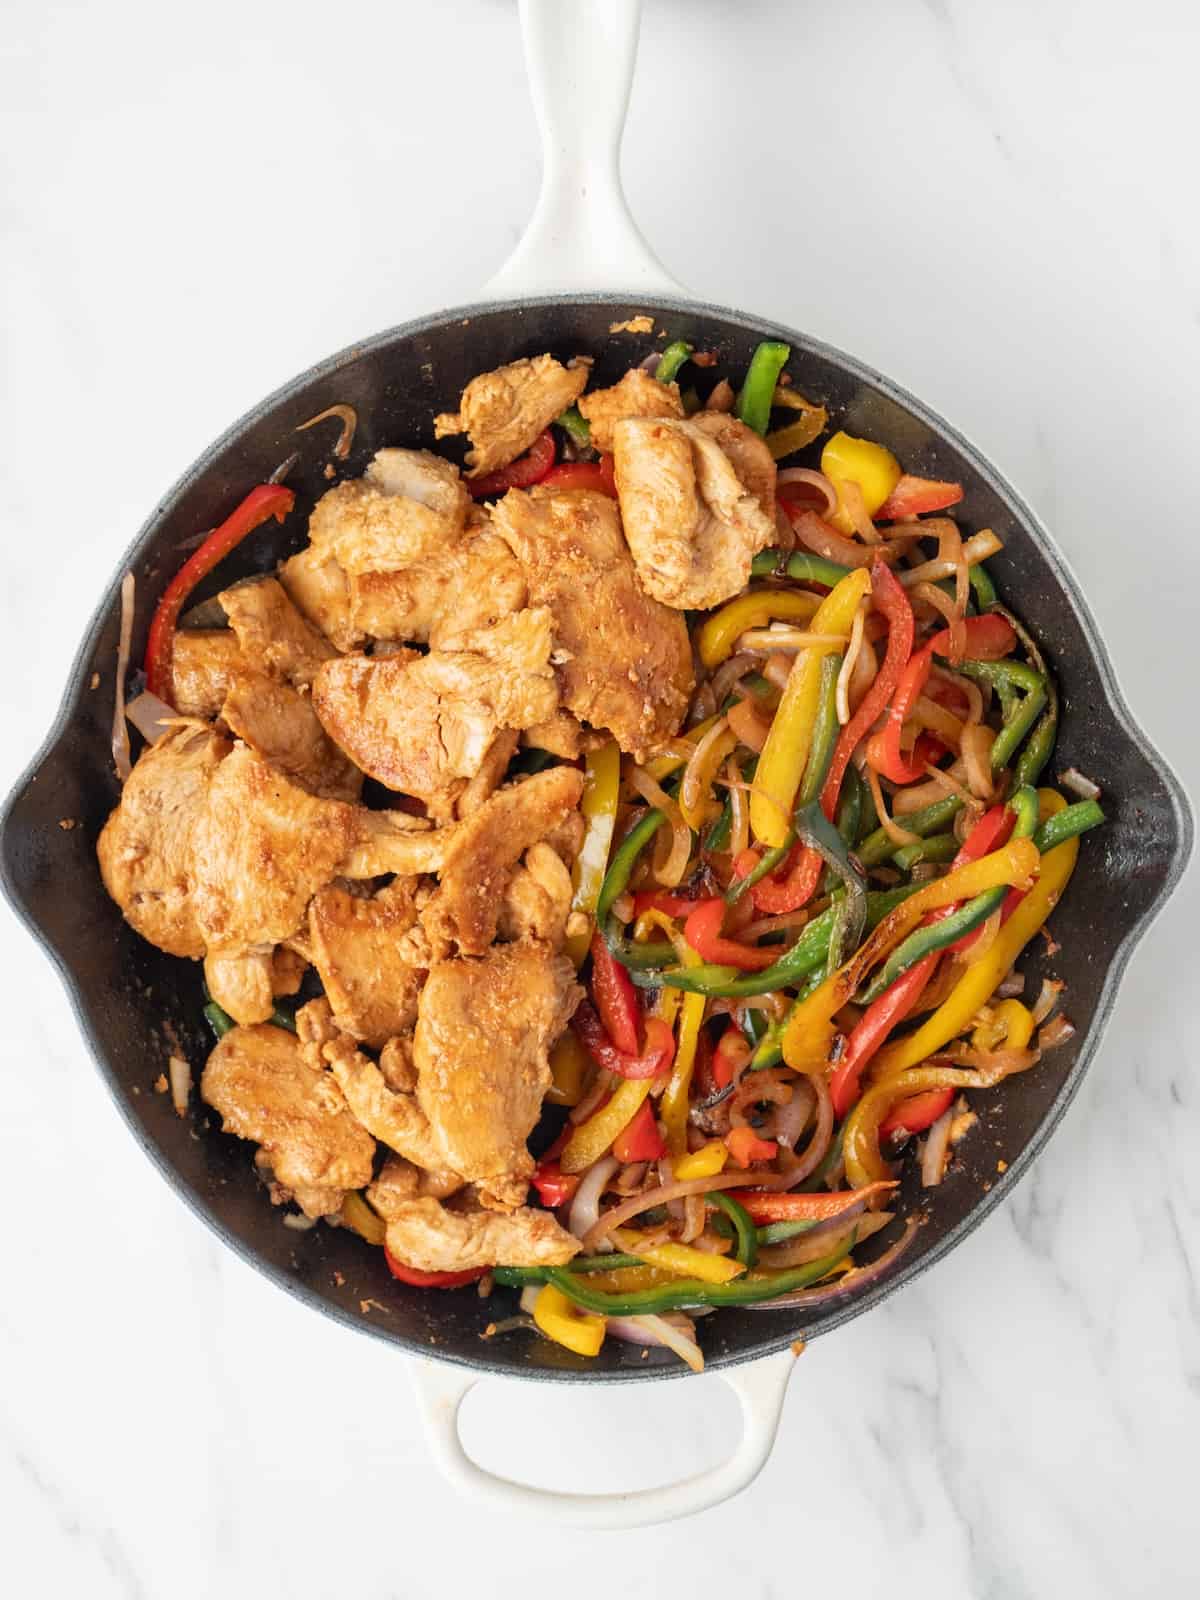 A cast iron skillet with cooked onions, bell peppers and poblano peppers, and cooked chicken added in.